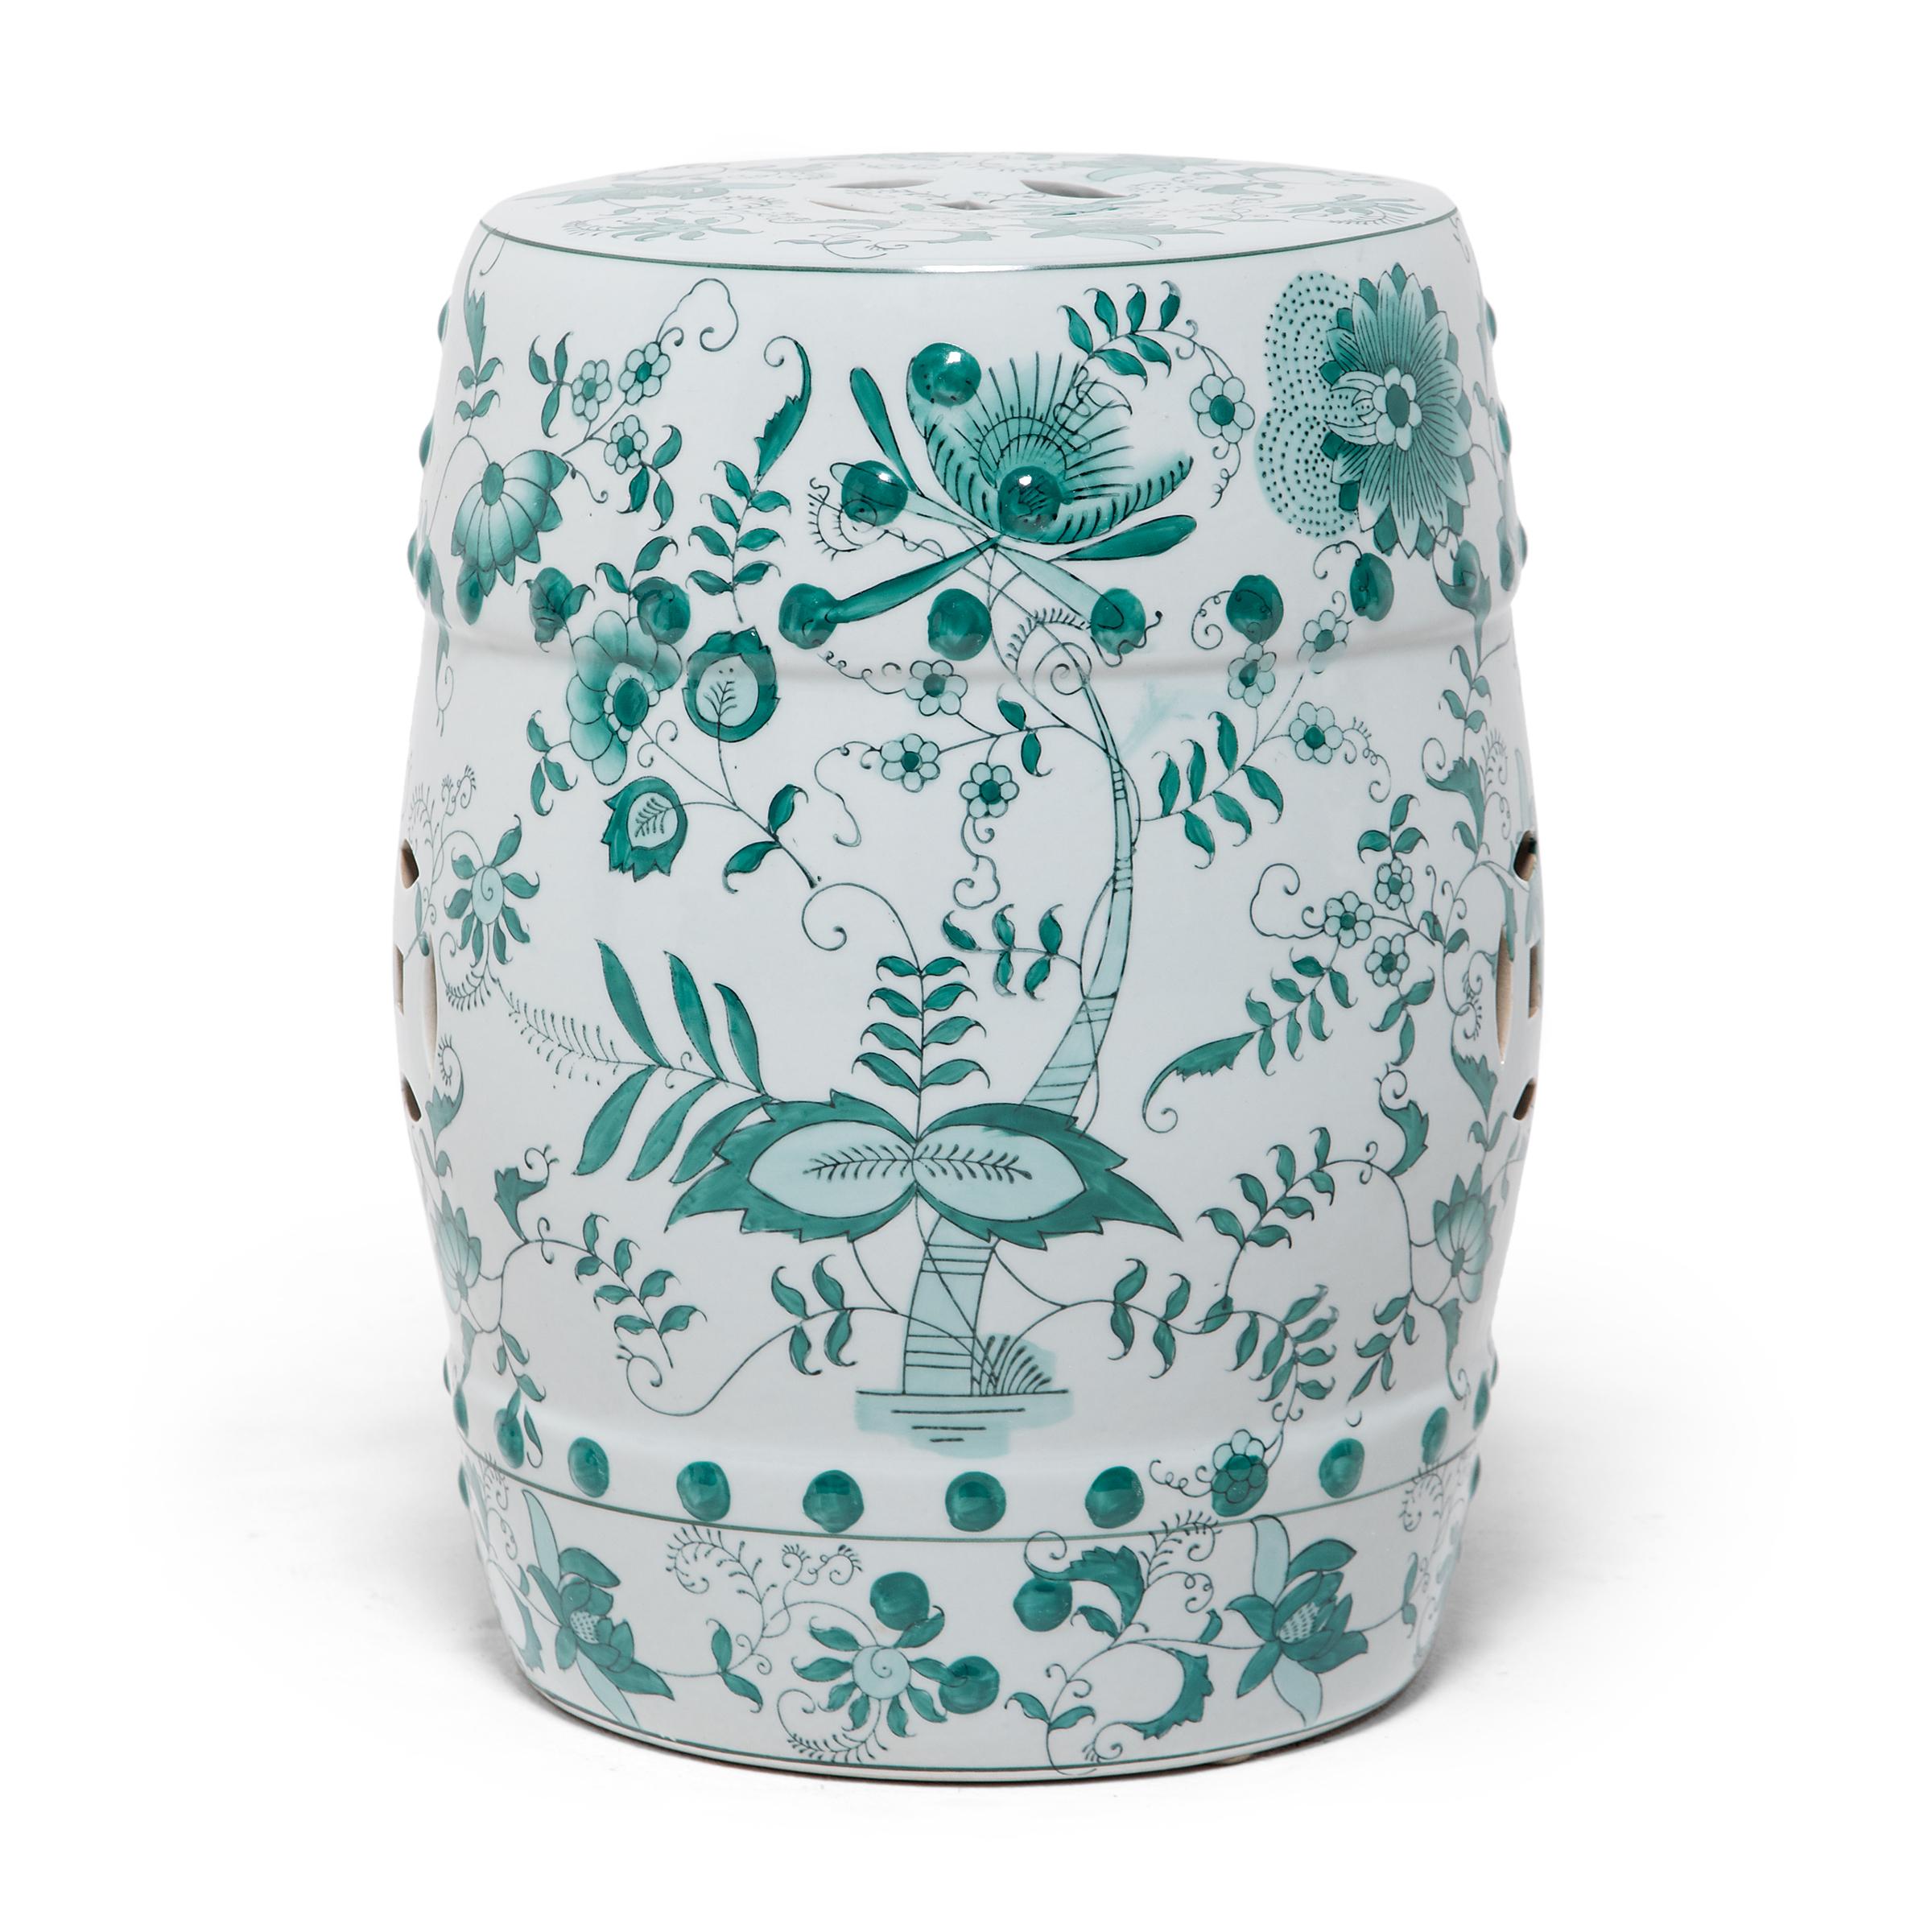 This charming porcelain garden stool is shaped in the traditional barrel drum form and patterned with an imaginative green-and-white floral design. The stool is painted with stylized peonies, plum blossoms, and lotus buds, each linked by delicate